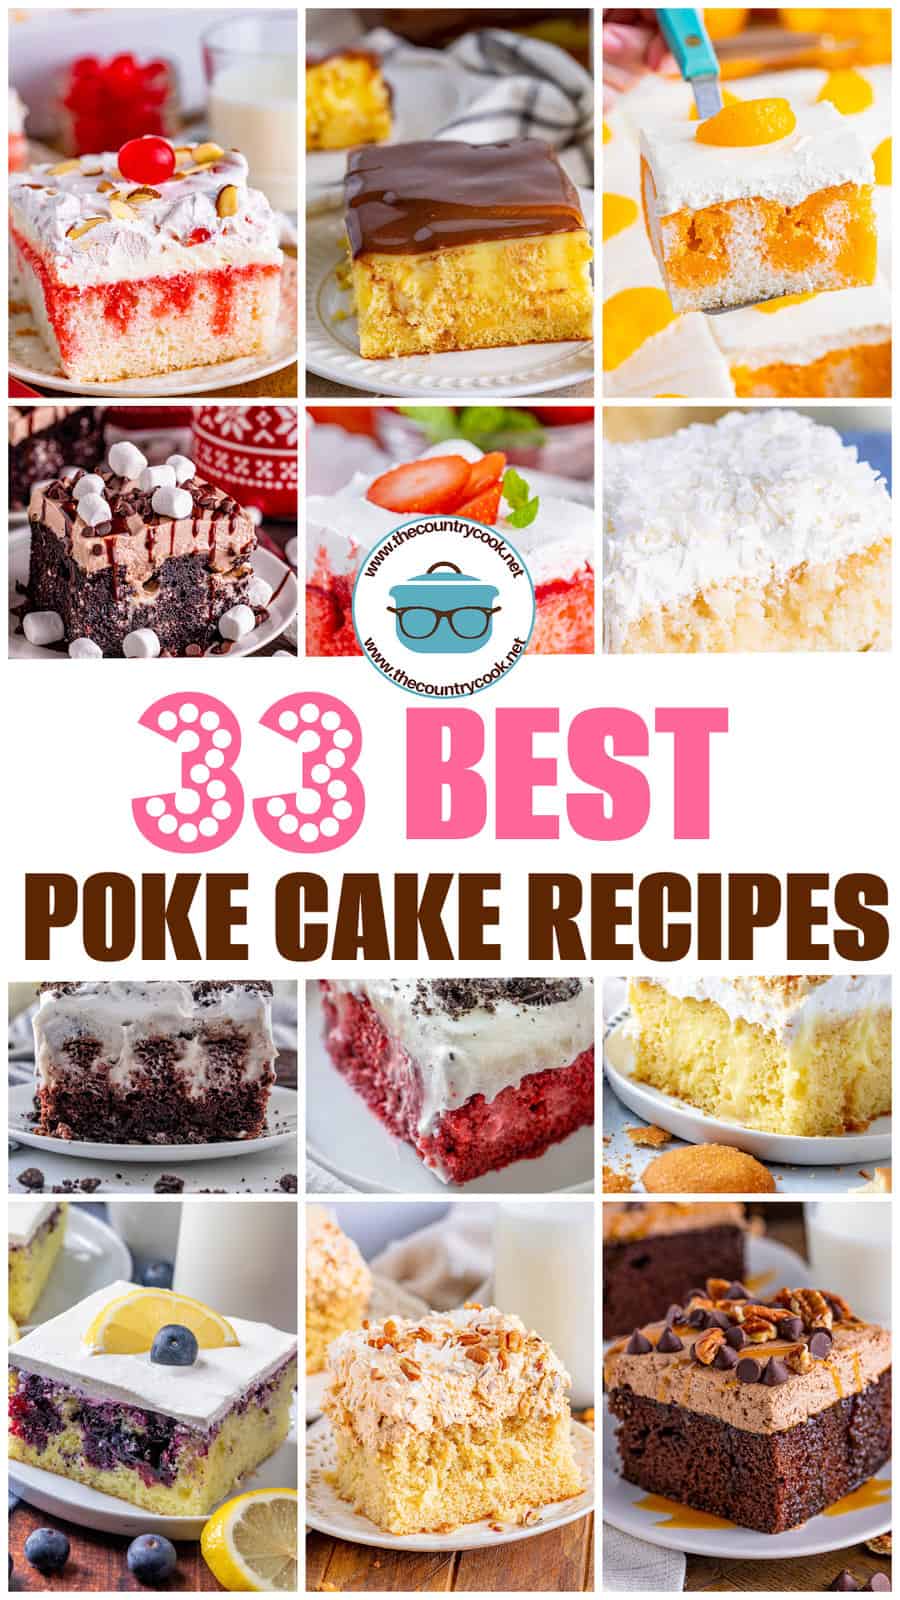 a collage of 12 photos of slices of poke cakes with text on the collage that reads "33 The Best Poke Cake Recipes". 